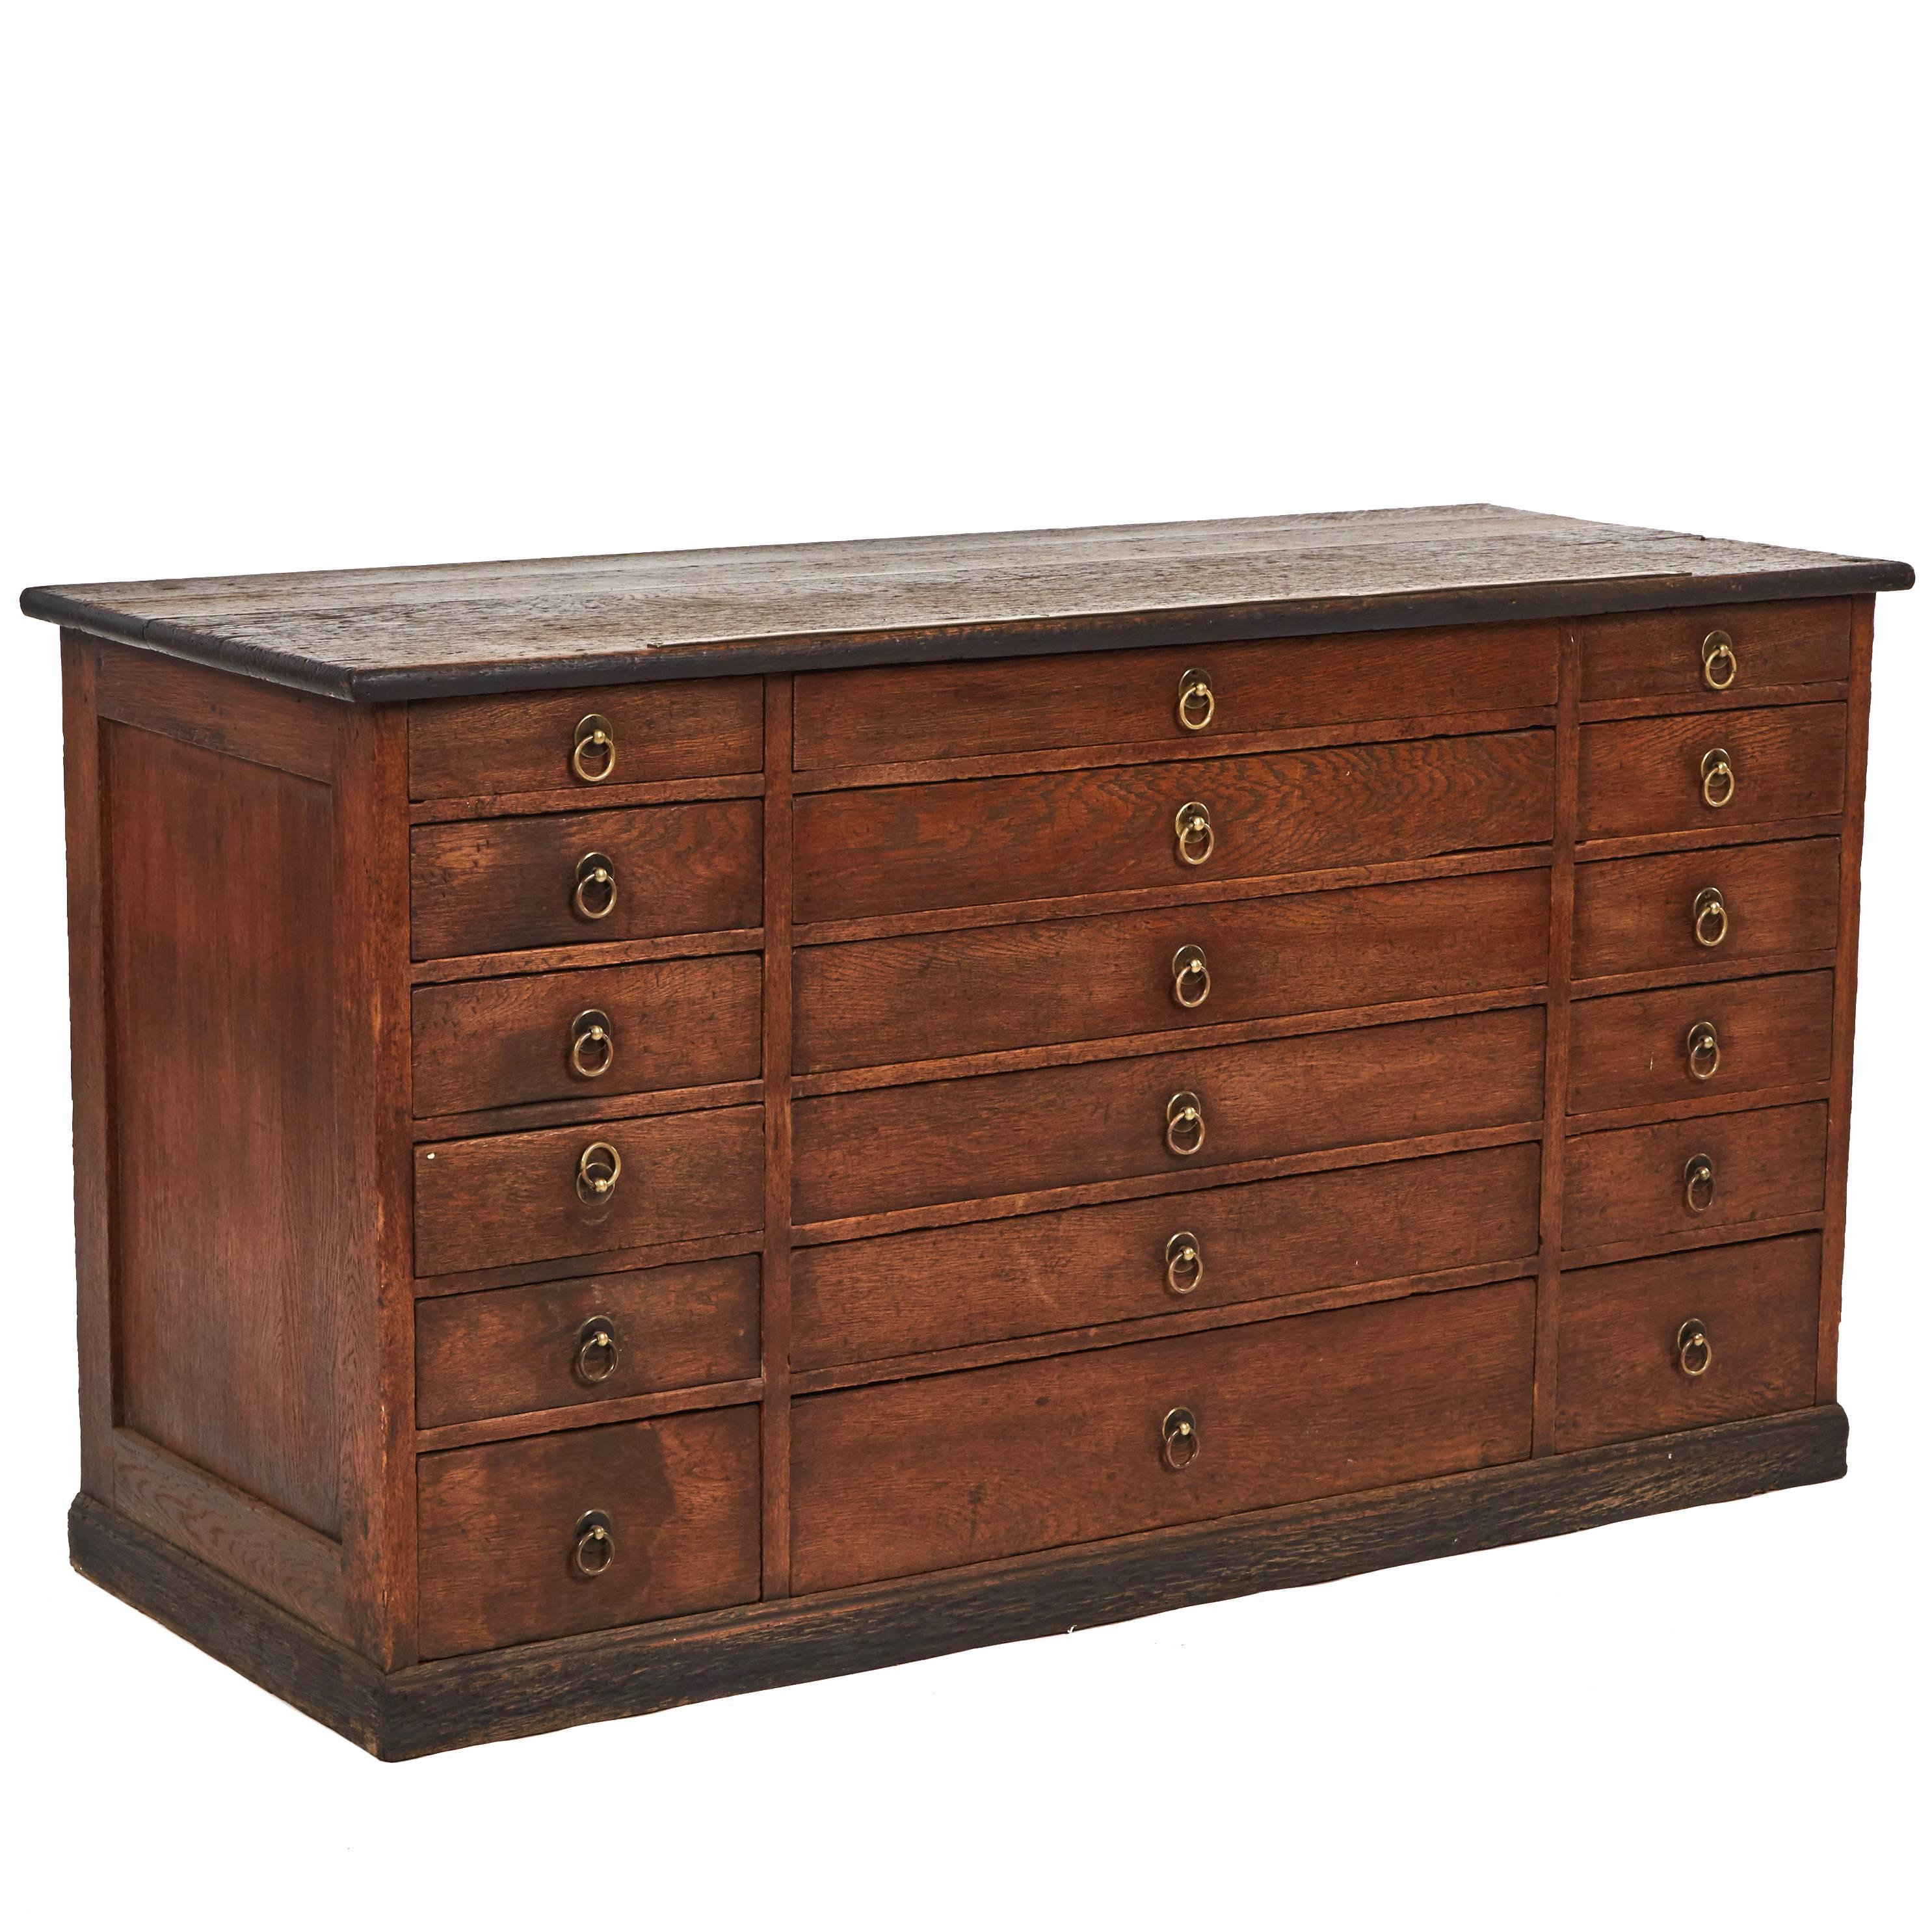 1880s French Tailor's Wood Chest of Drawers with Brass Handles 